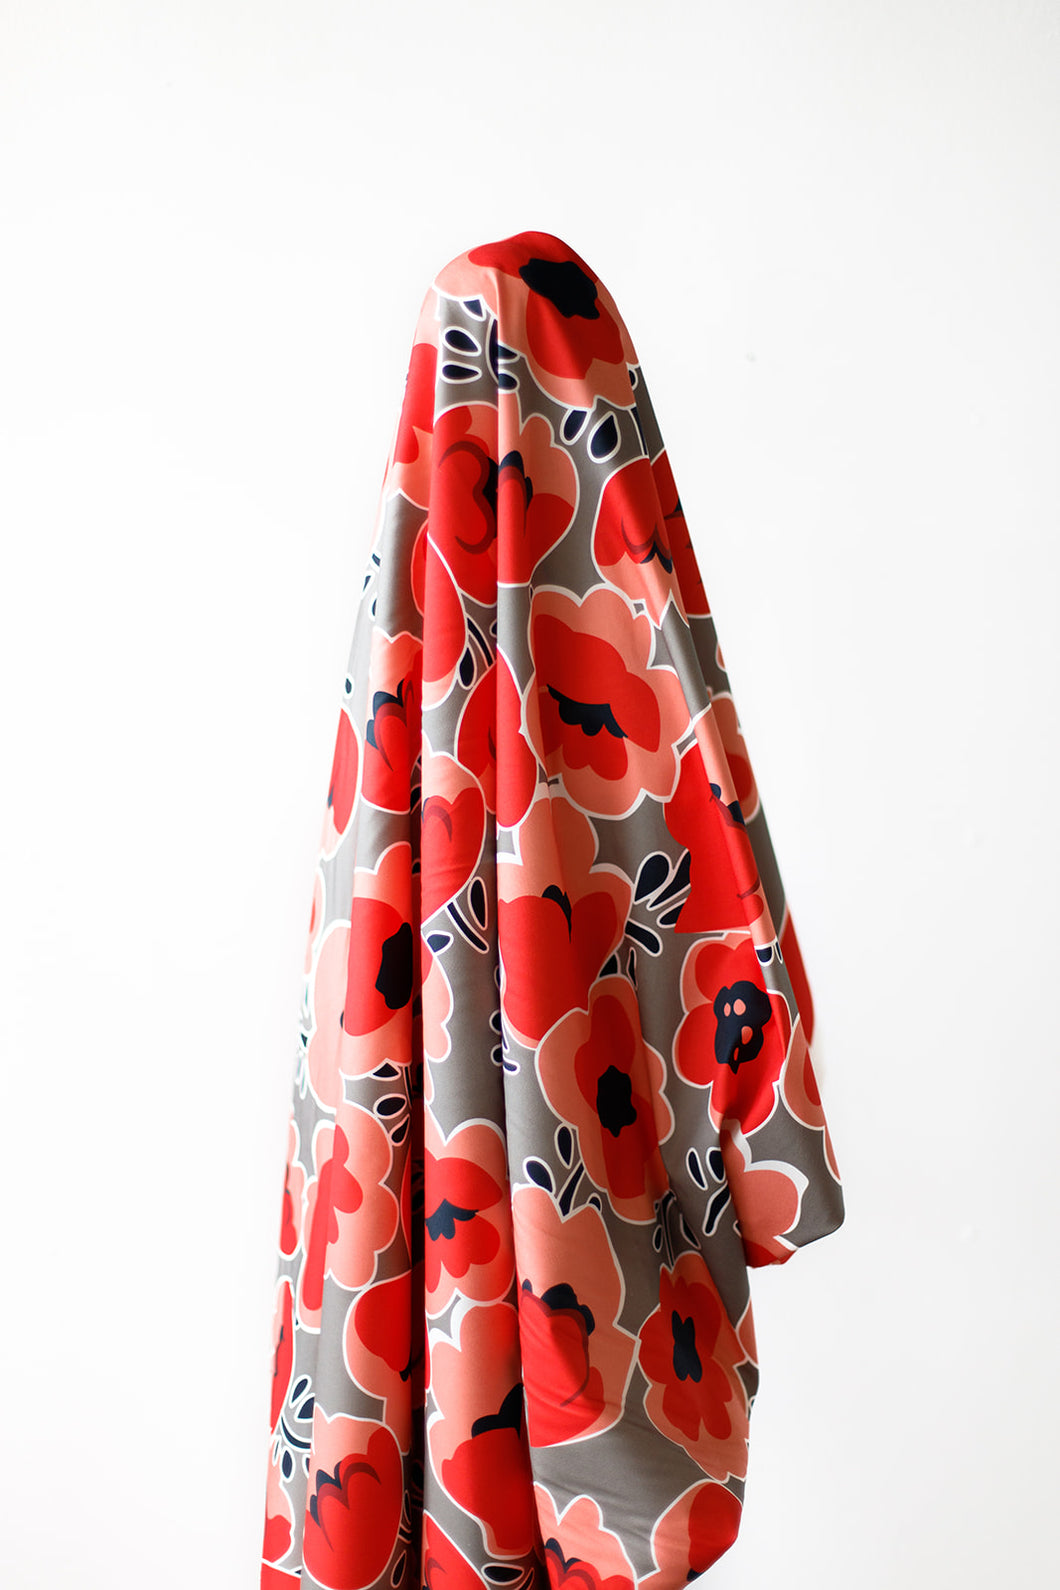 Retro Vibes Cotton Sateen Poppy Abstract 144 cm wide $24 pm